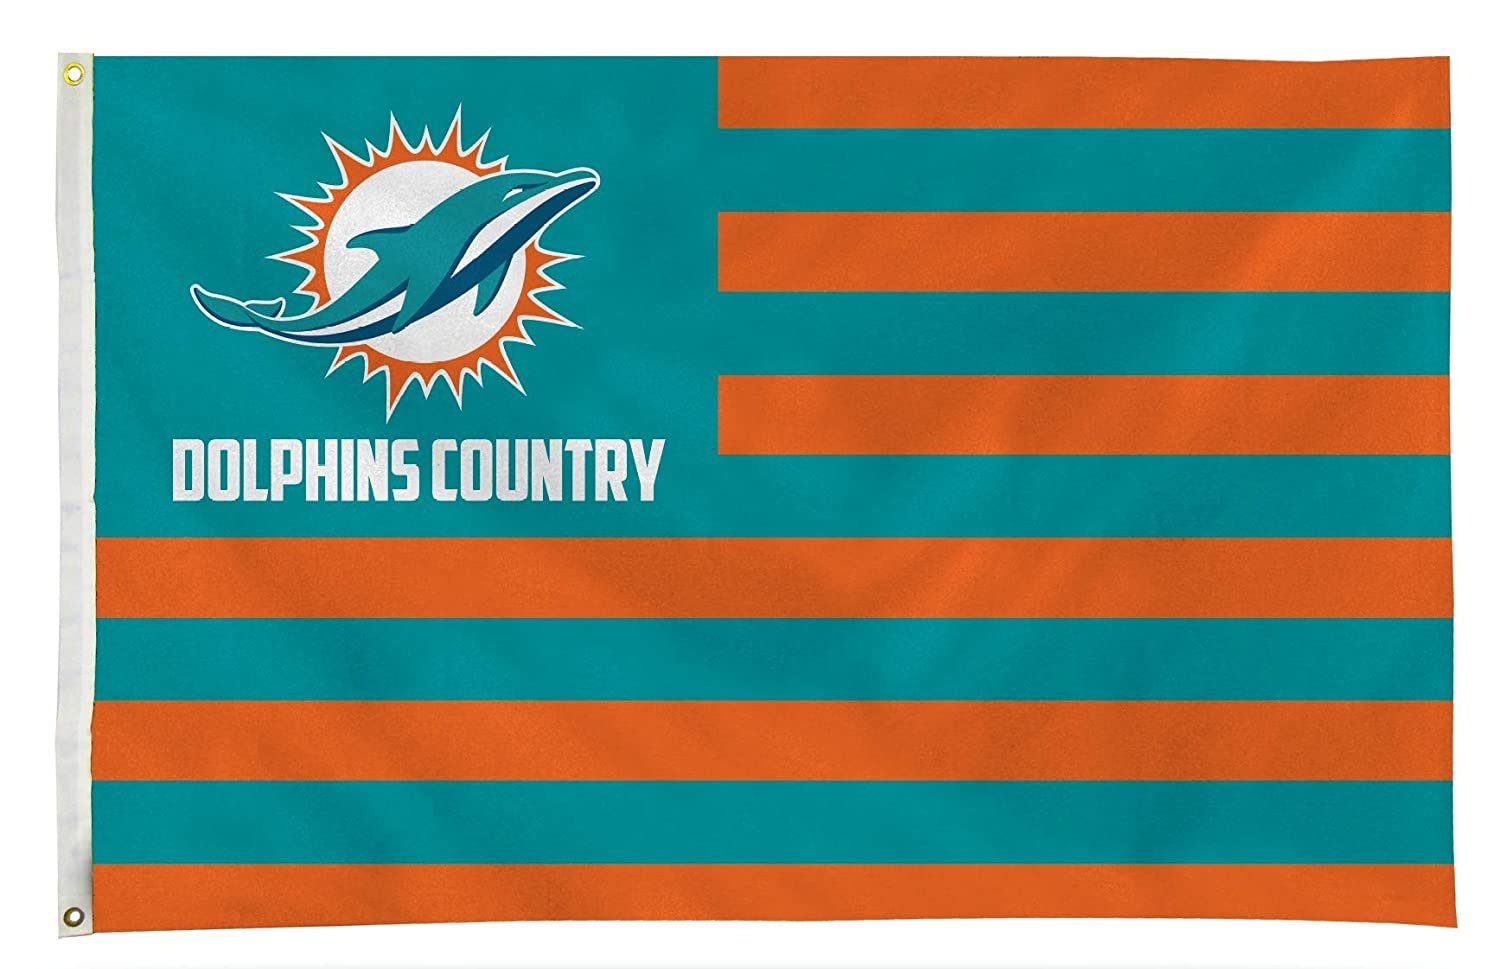 Miami Dolphins Flag Banner 3x5 Country Design Premium with Metal Grommets Outdoor House Football